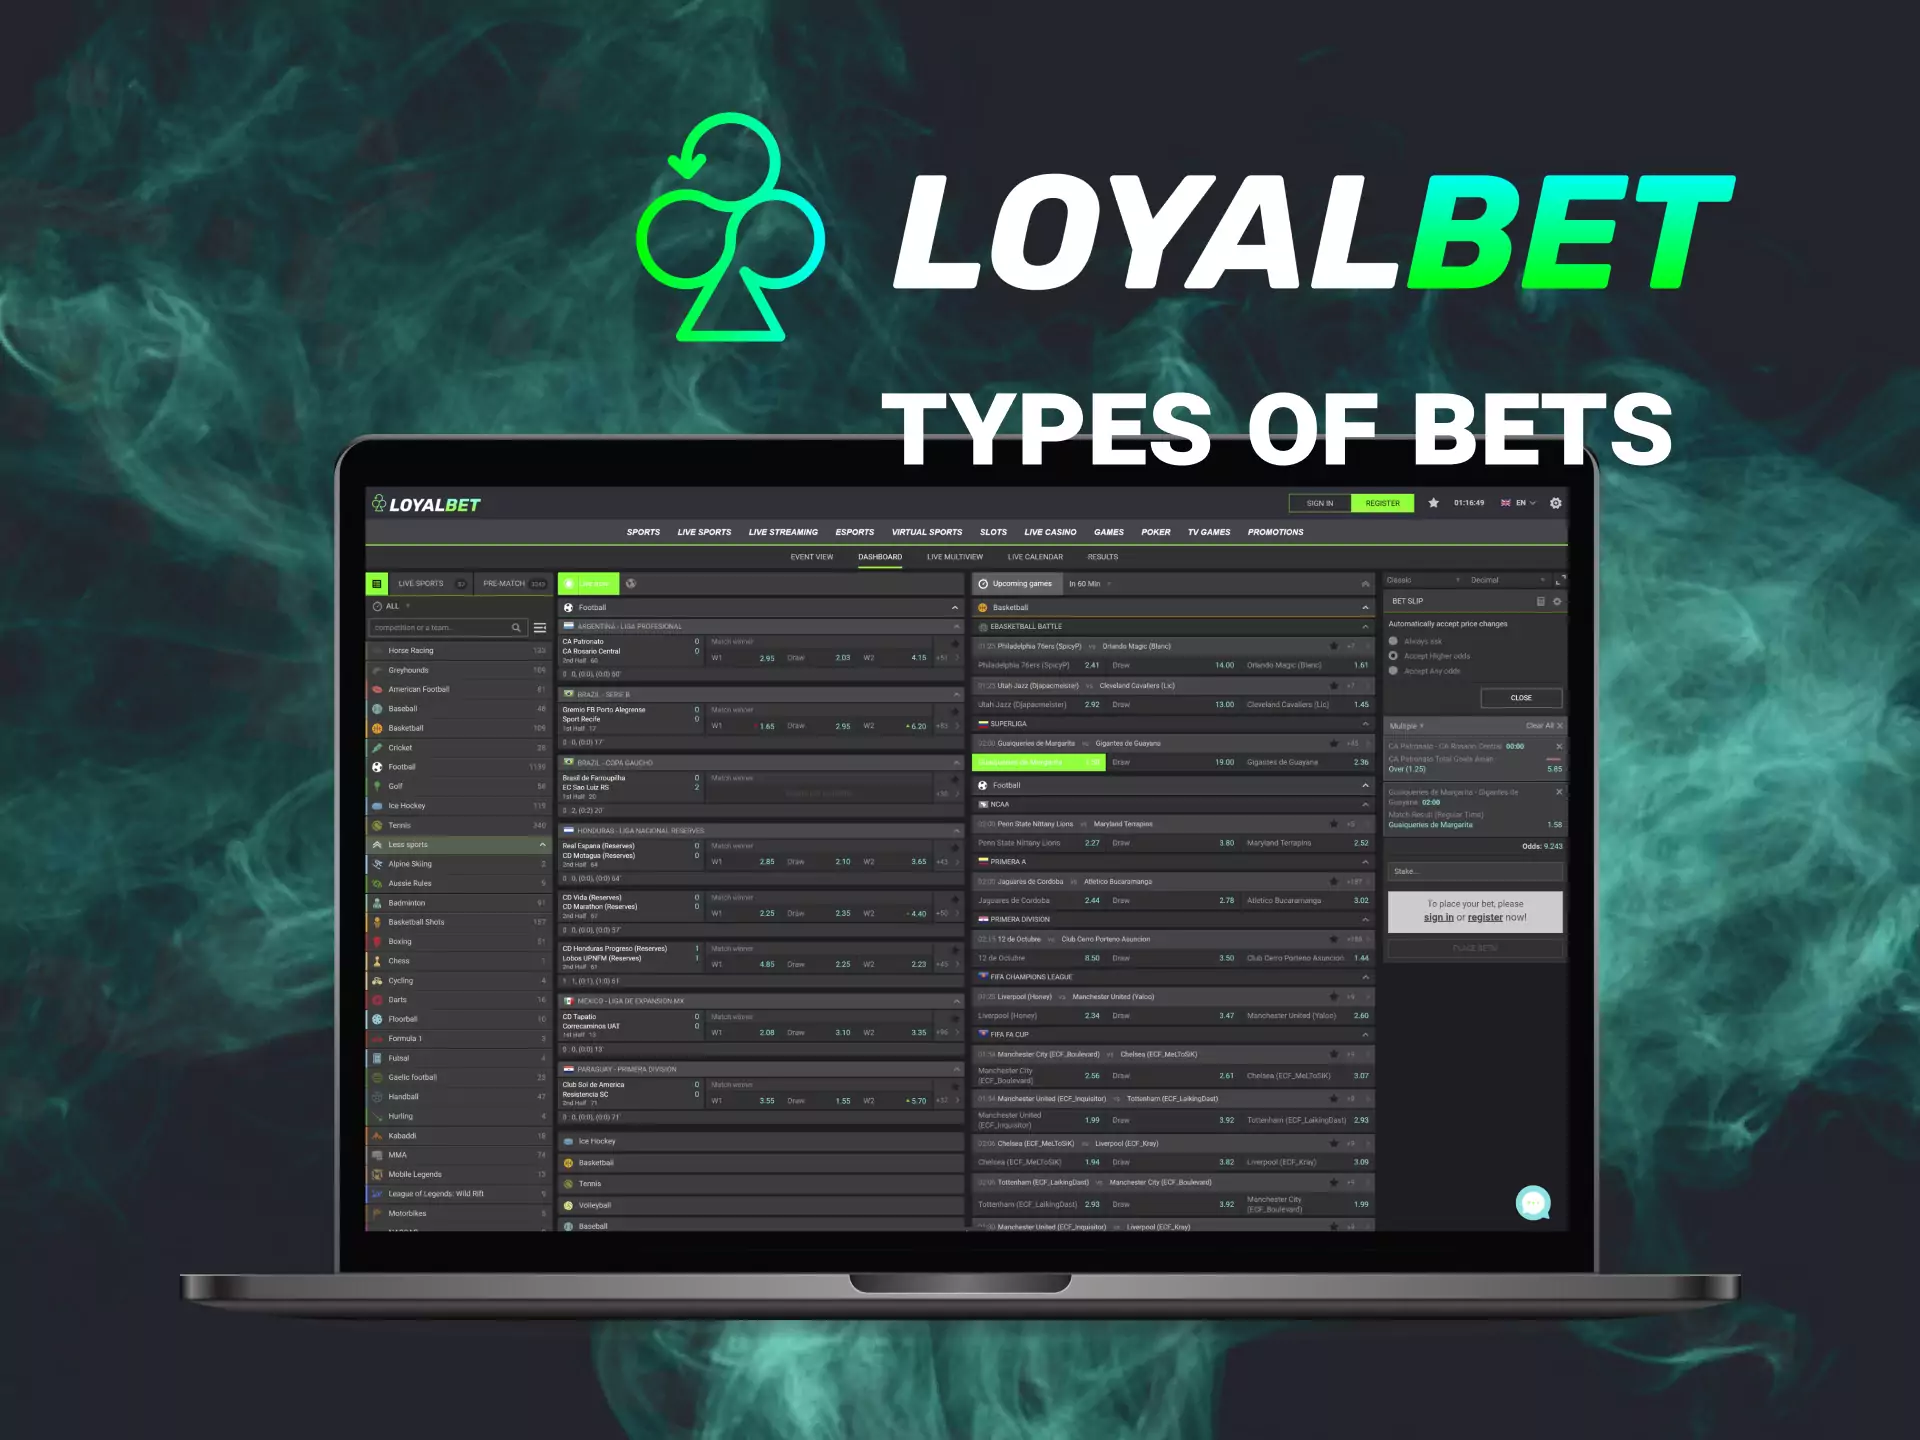 Betting on Loyalbet includes different types of bets.